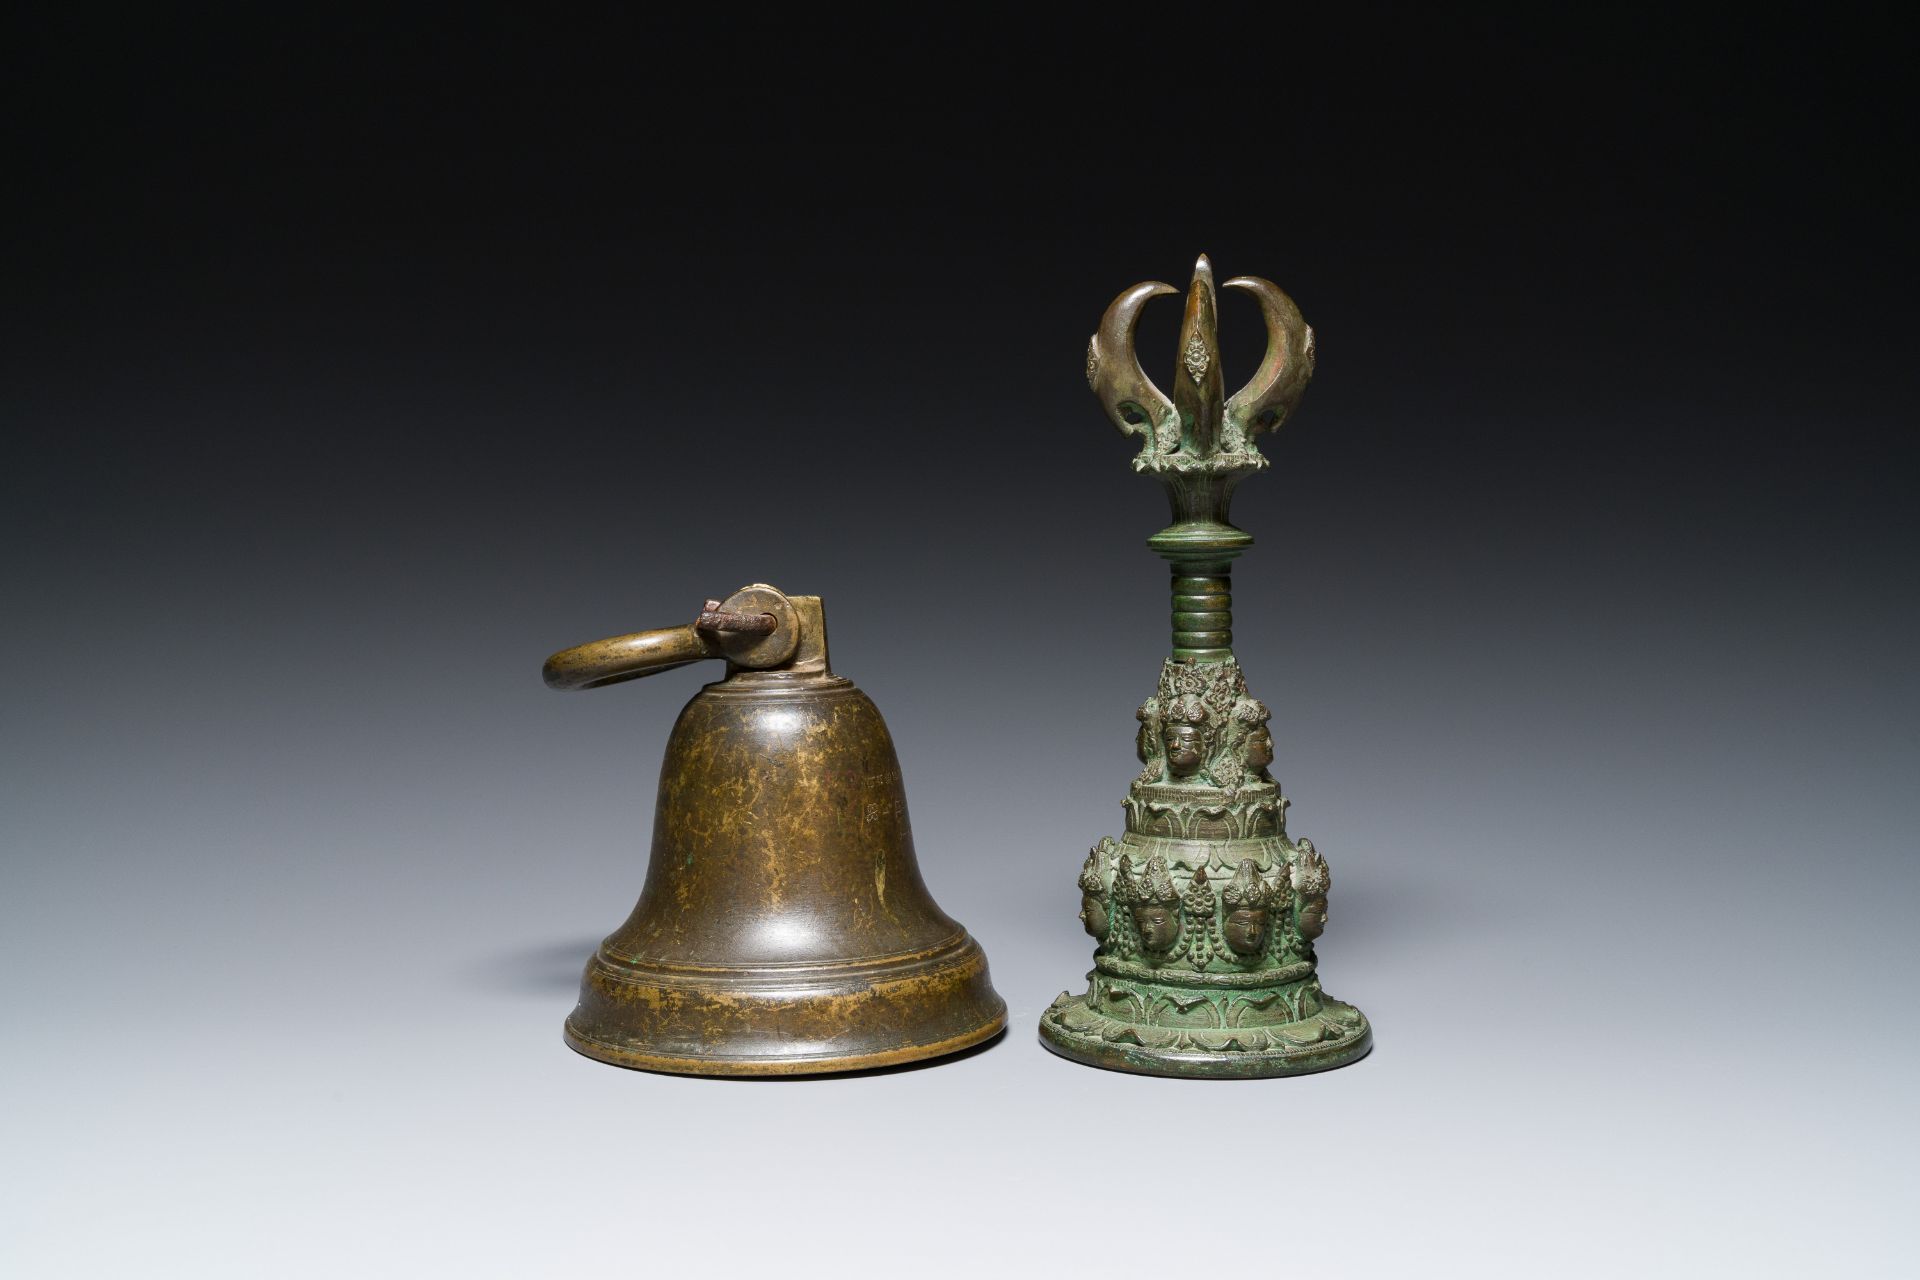 A bronze bell and a ceremonial hand bell, South Asia and Southeast Asia, 19th C. or earlier - Bild 8 aus 21